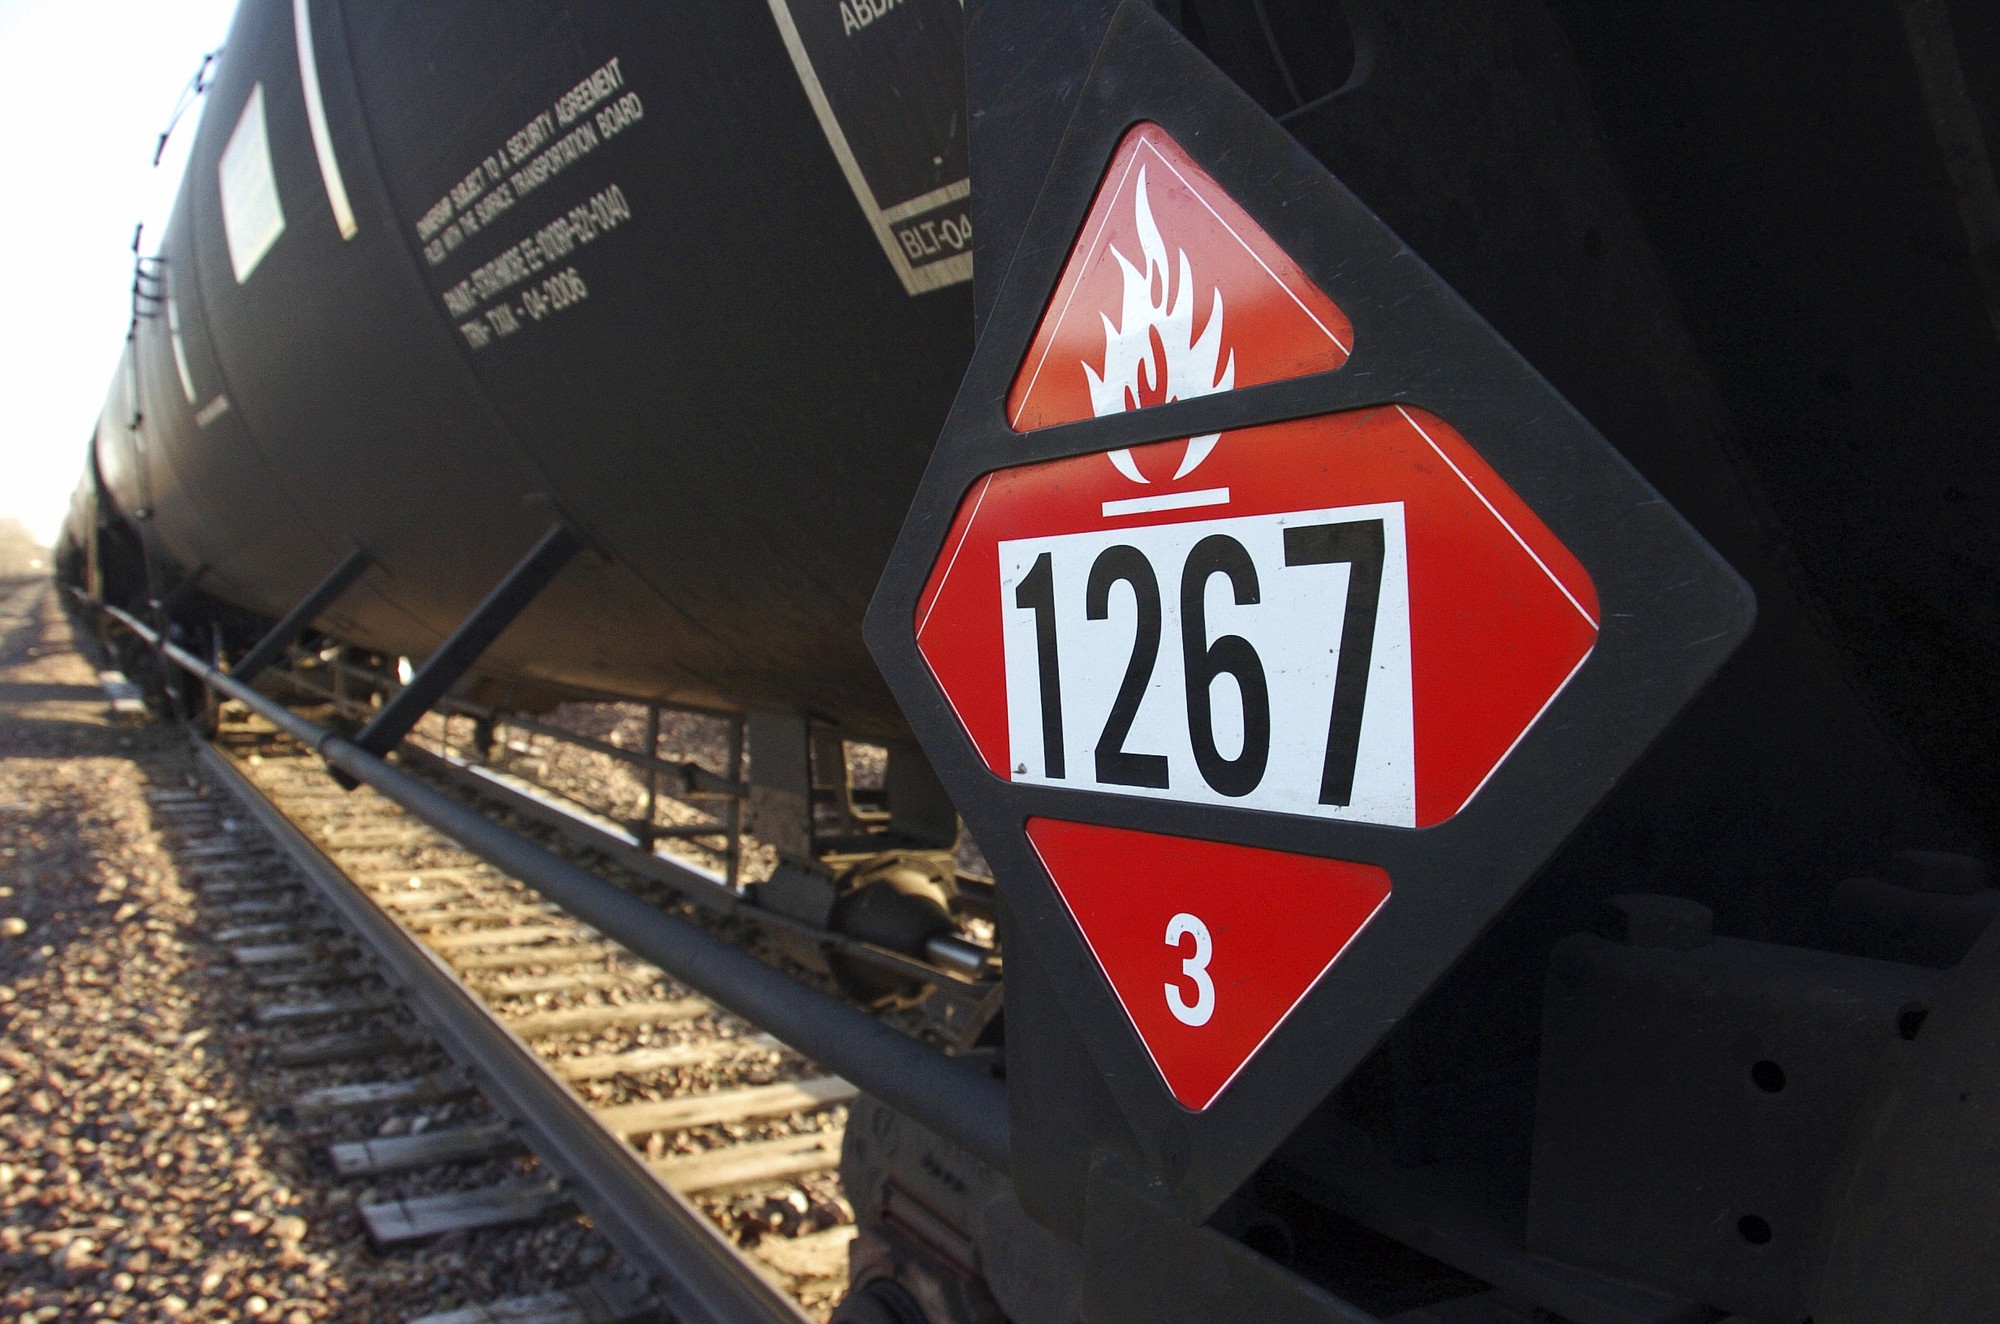 Growth in oil shipping by rail, coupled with explosive derailments, have fanned public concerns about tank car safety -- &quot;1267&quot; indicates that a tanker carries crude oil -- and environmental impacts.